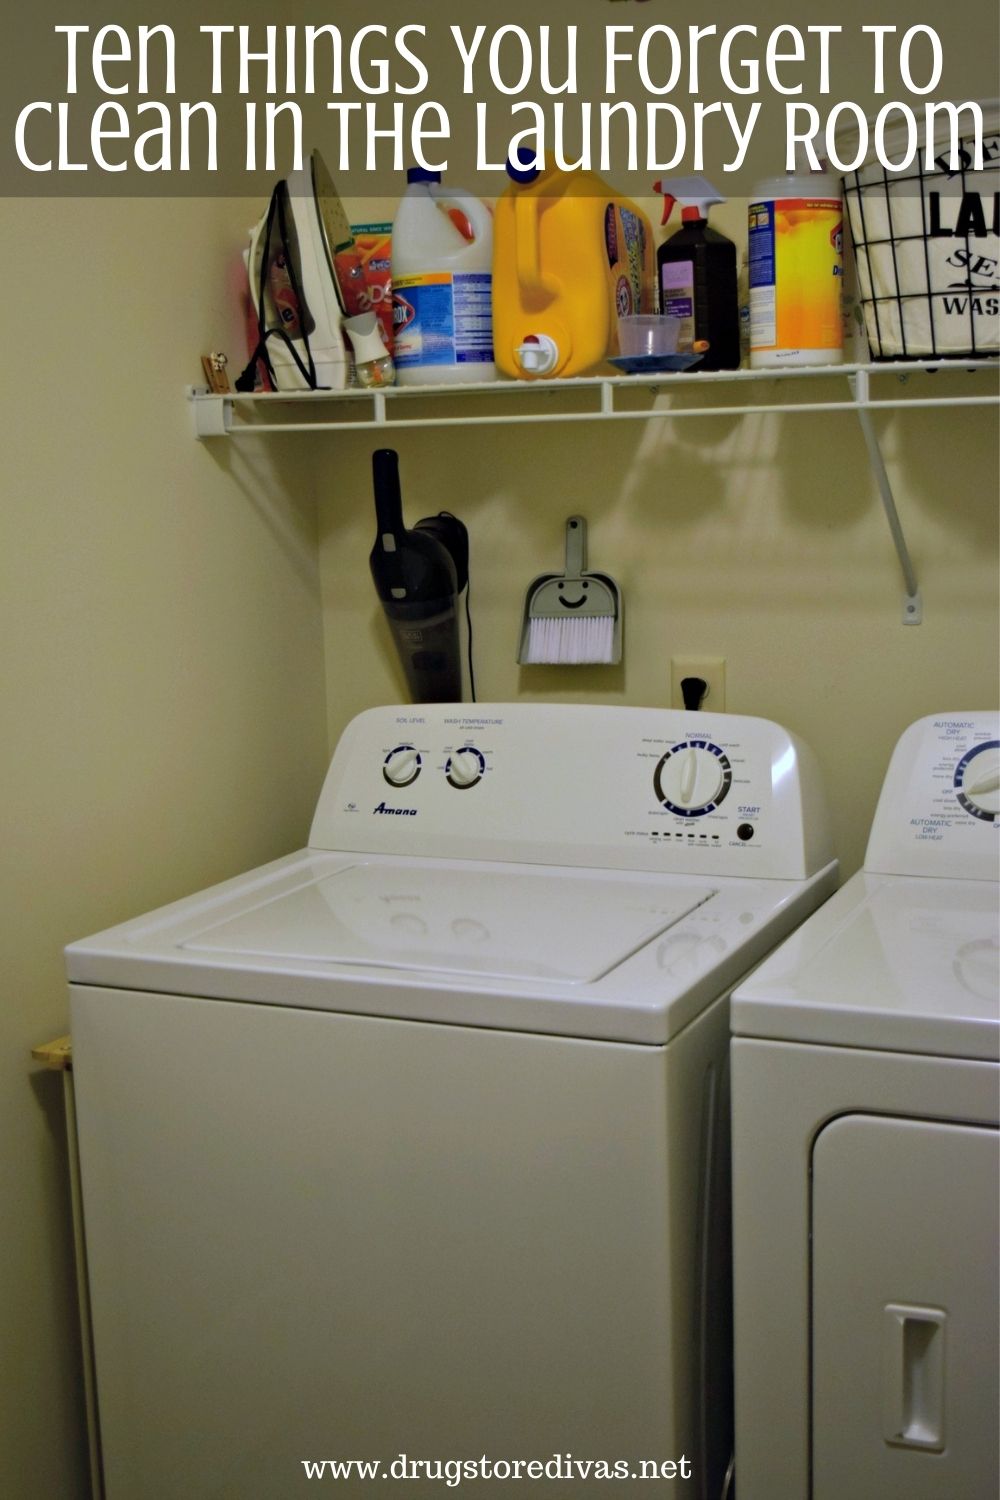 Washing machine and dryer in a laundry room with the words 